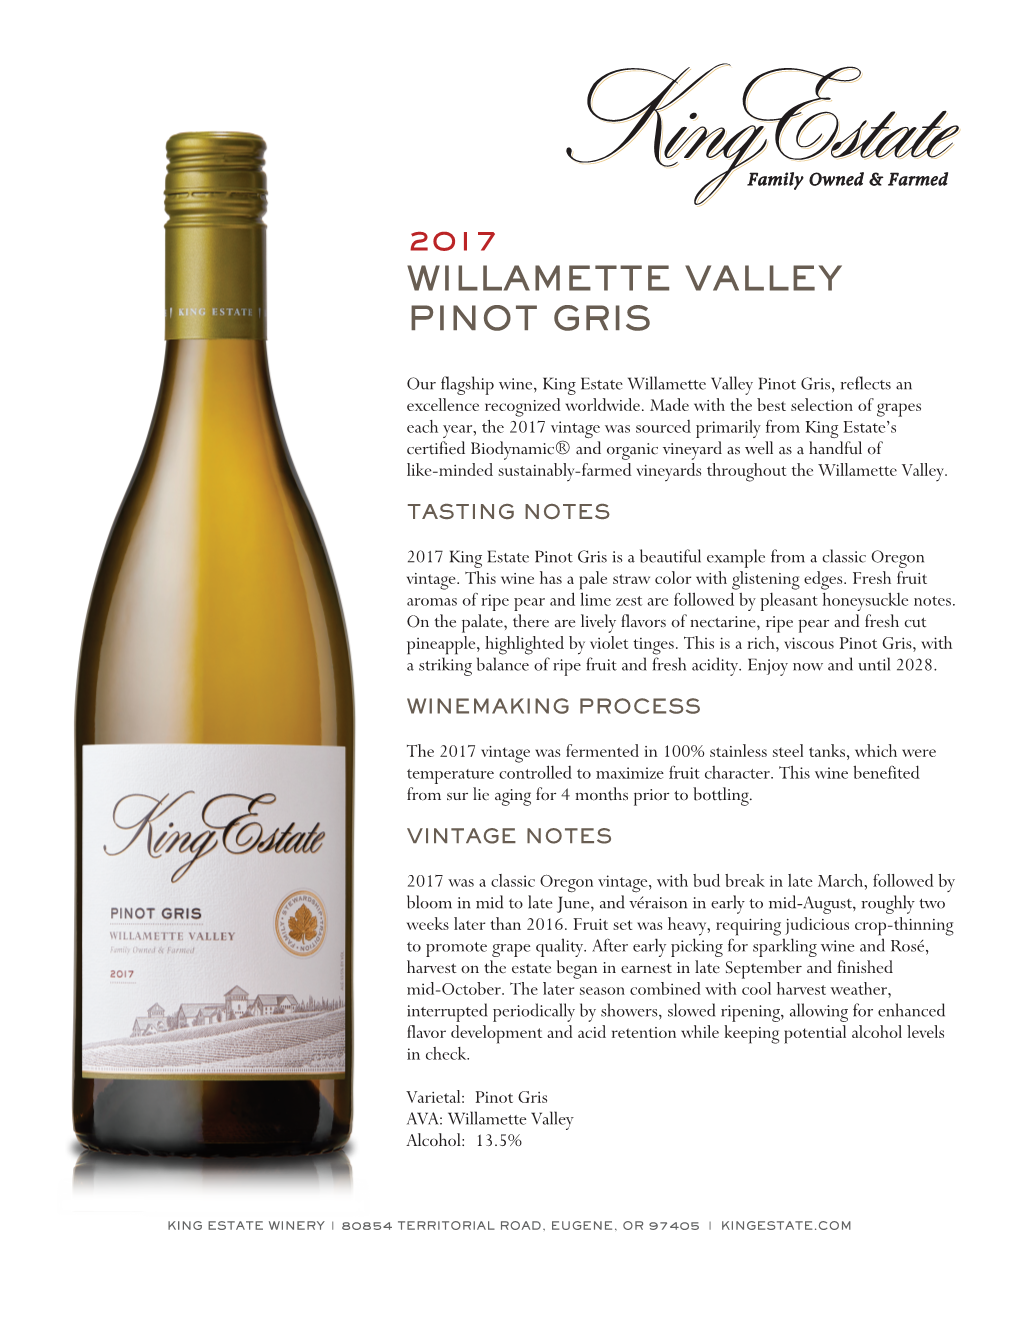 2017 King Estate Pinot Gris Is a Beautiful Example from a Classic Oregon Vintage